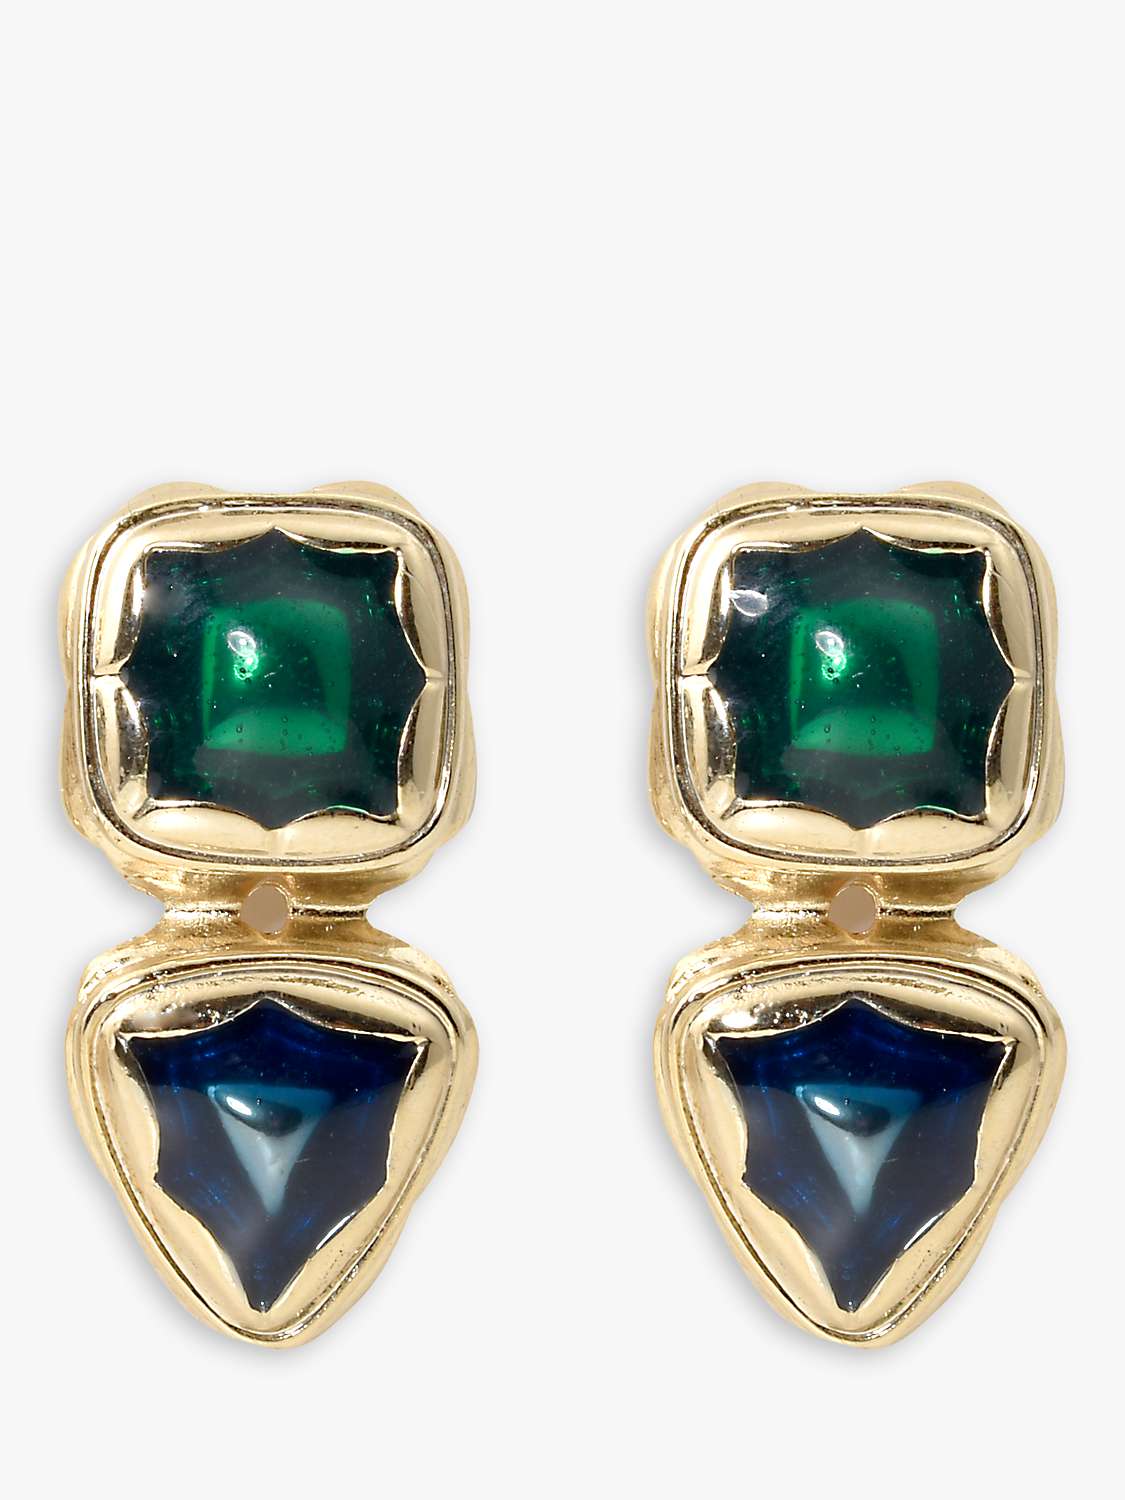 Buy Eclectica Vintage 18ct Gold Plated Enamel Stud Earrings, Dated Circa 1980s Online at johnlewis.com